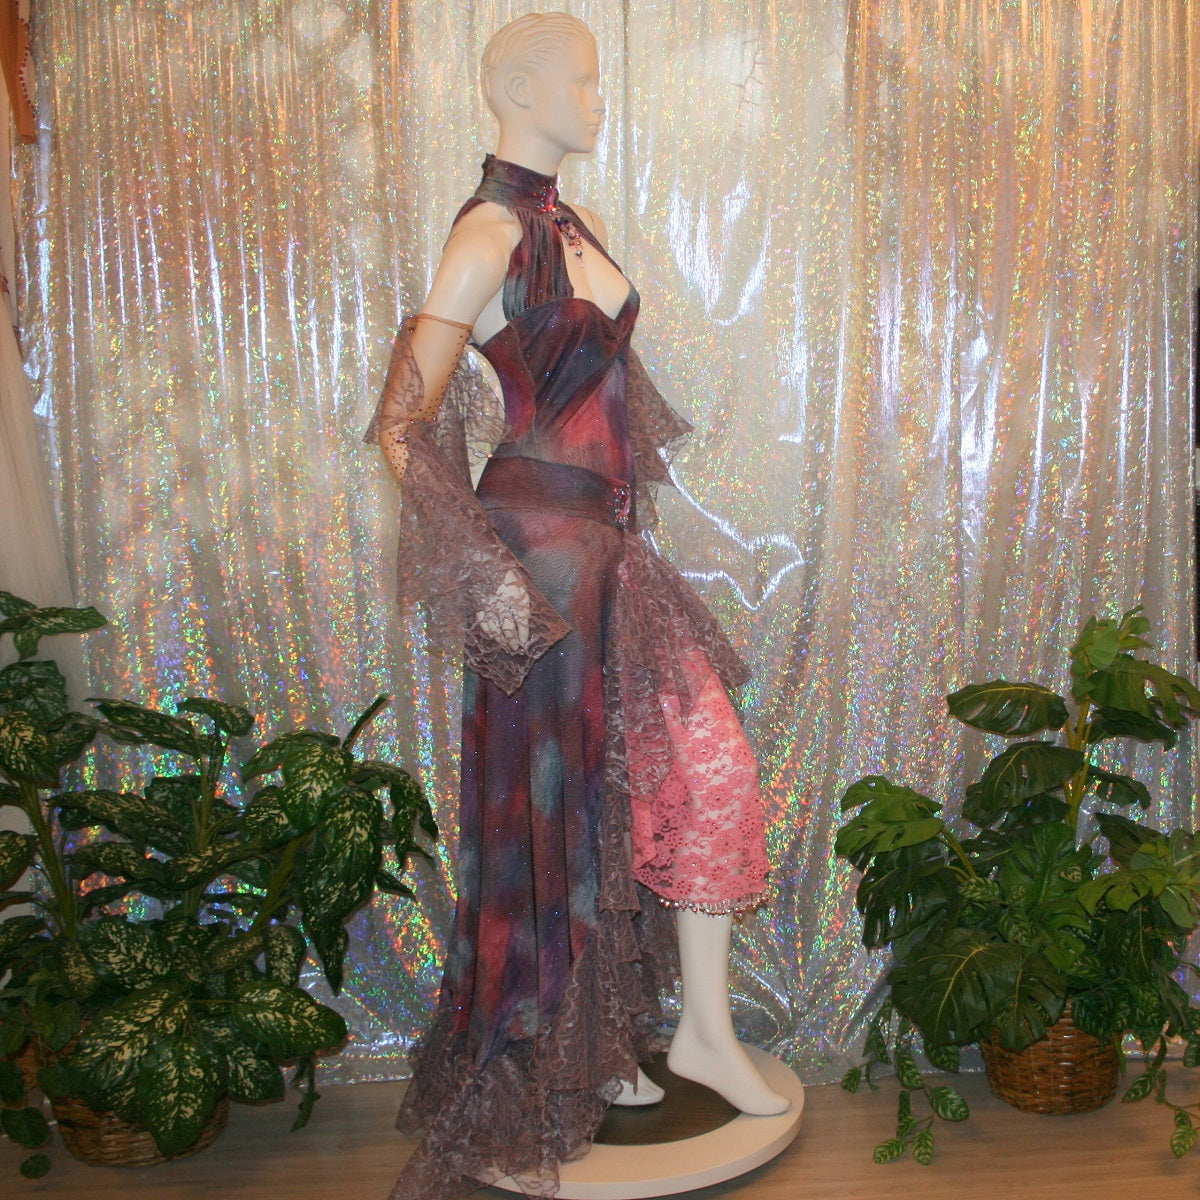 side view of Orchid & pink rumba-bolero dress, also fabulous for a ballroom solo dance, created in tye dye glitter slinky of orchids & pinks is actually a bodysuit & skirt with oodles of orchid Barcelona lace flounces, embellished with Swarovski rhinestone work & hand beading, incudes nude illusion gauntlets with Swarovski rhinestone work & flounces spiraling down each arm.